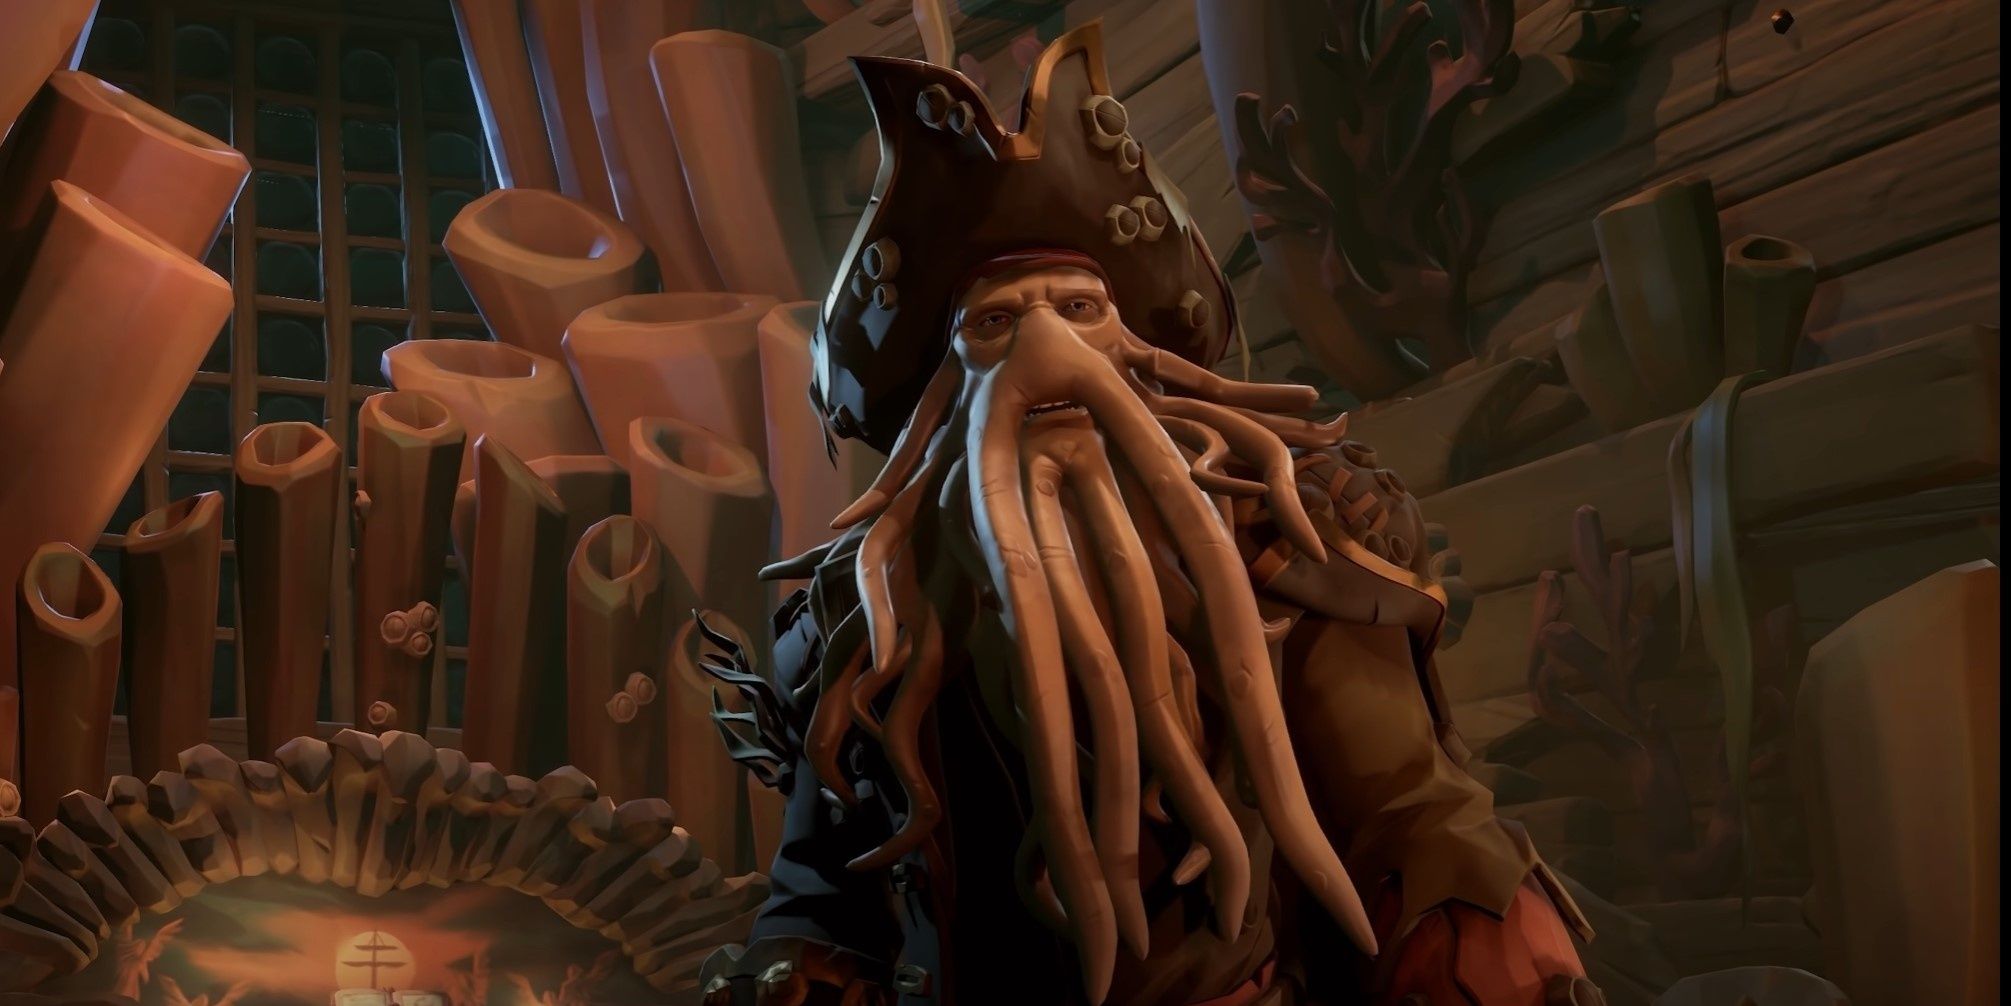 Davy Jones in Sea of Thieves: A Pirate's Life